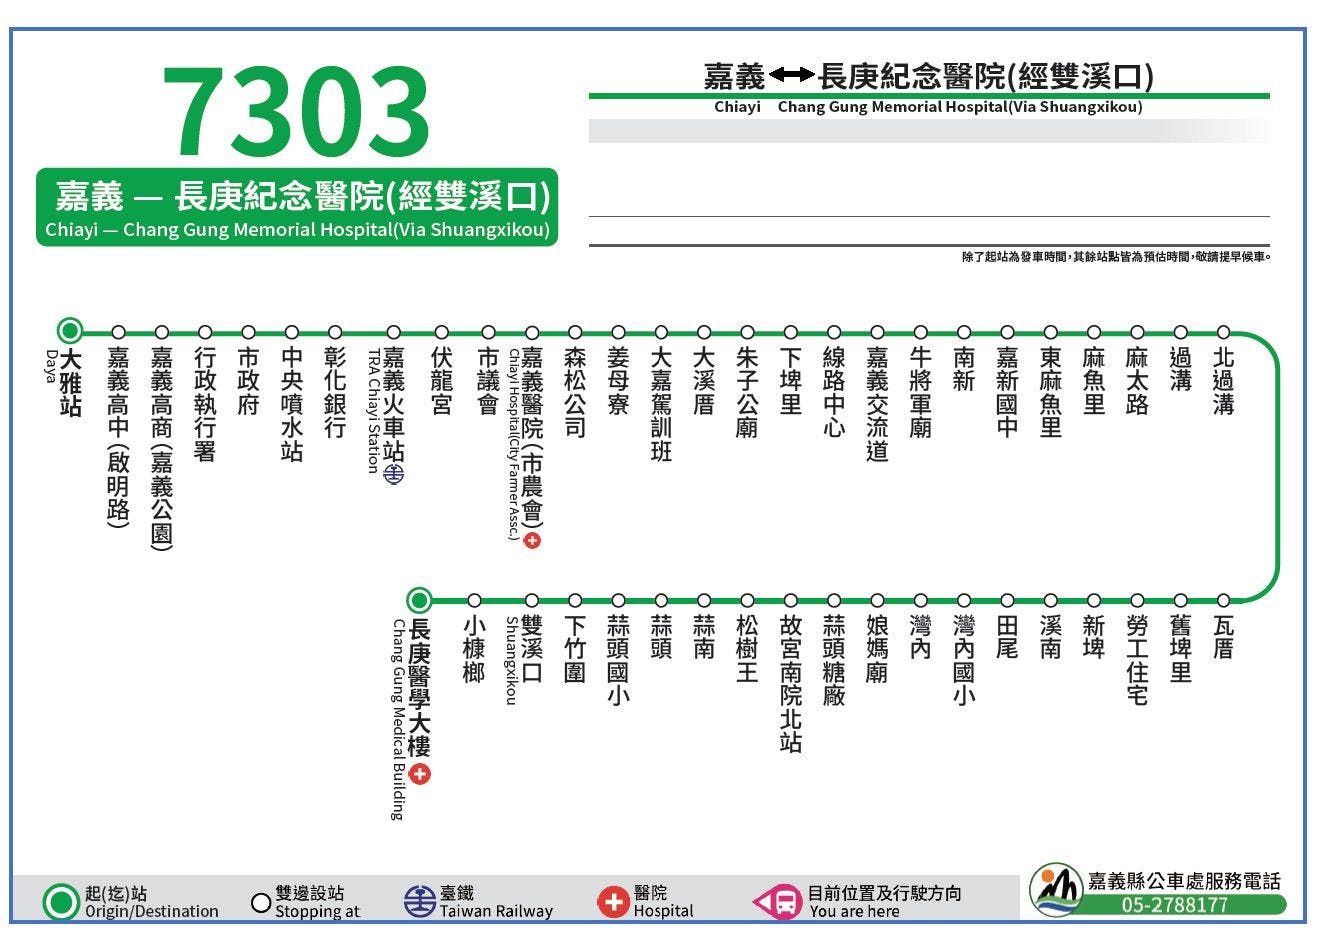 7303Route Map-Chiayi County Bus Service Administration